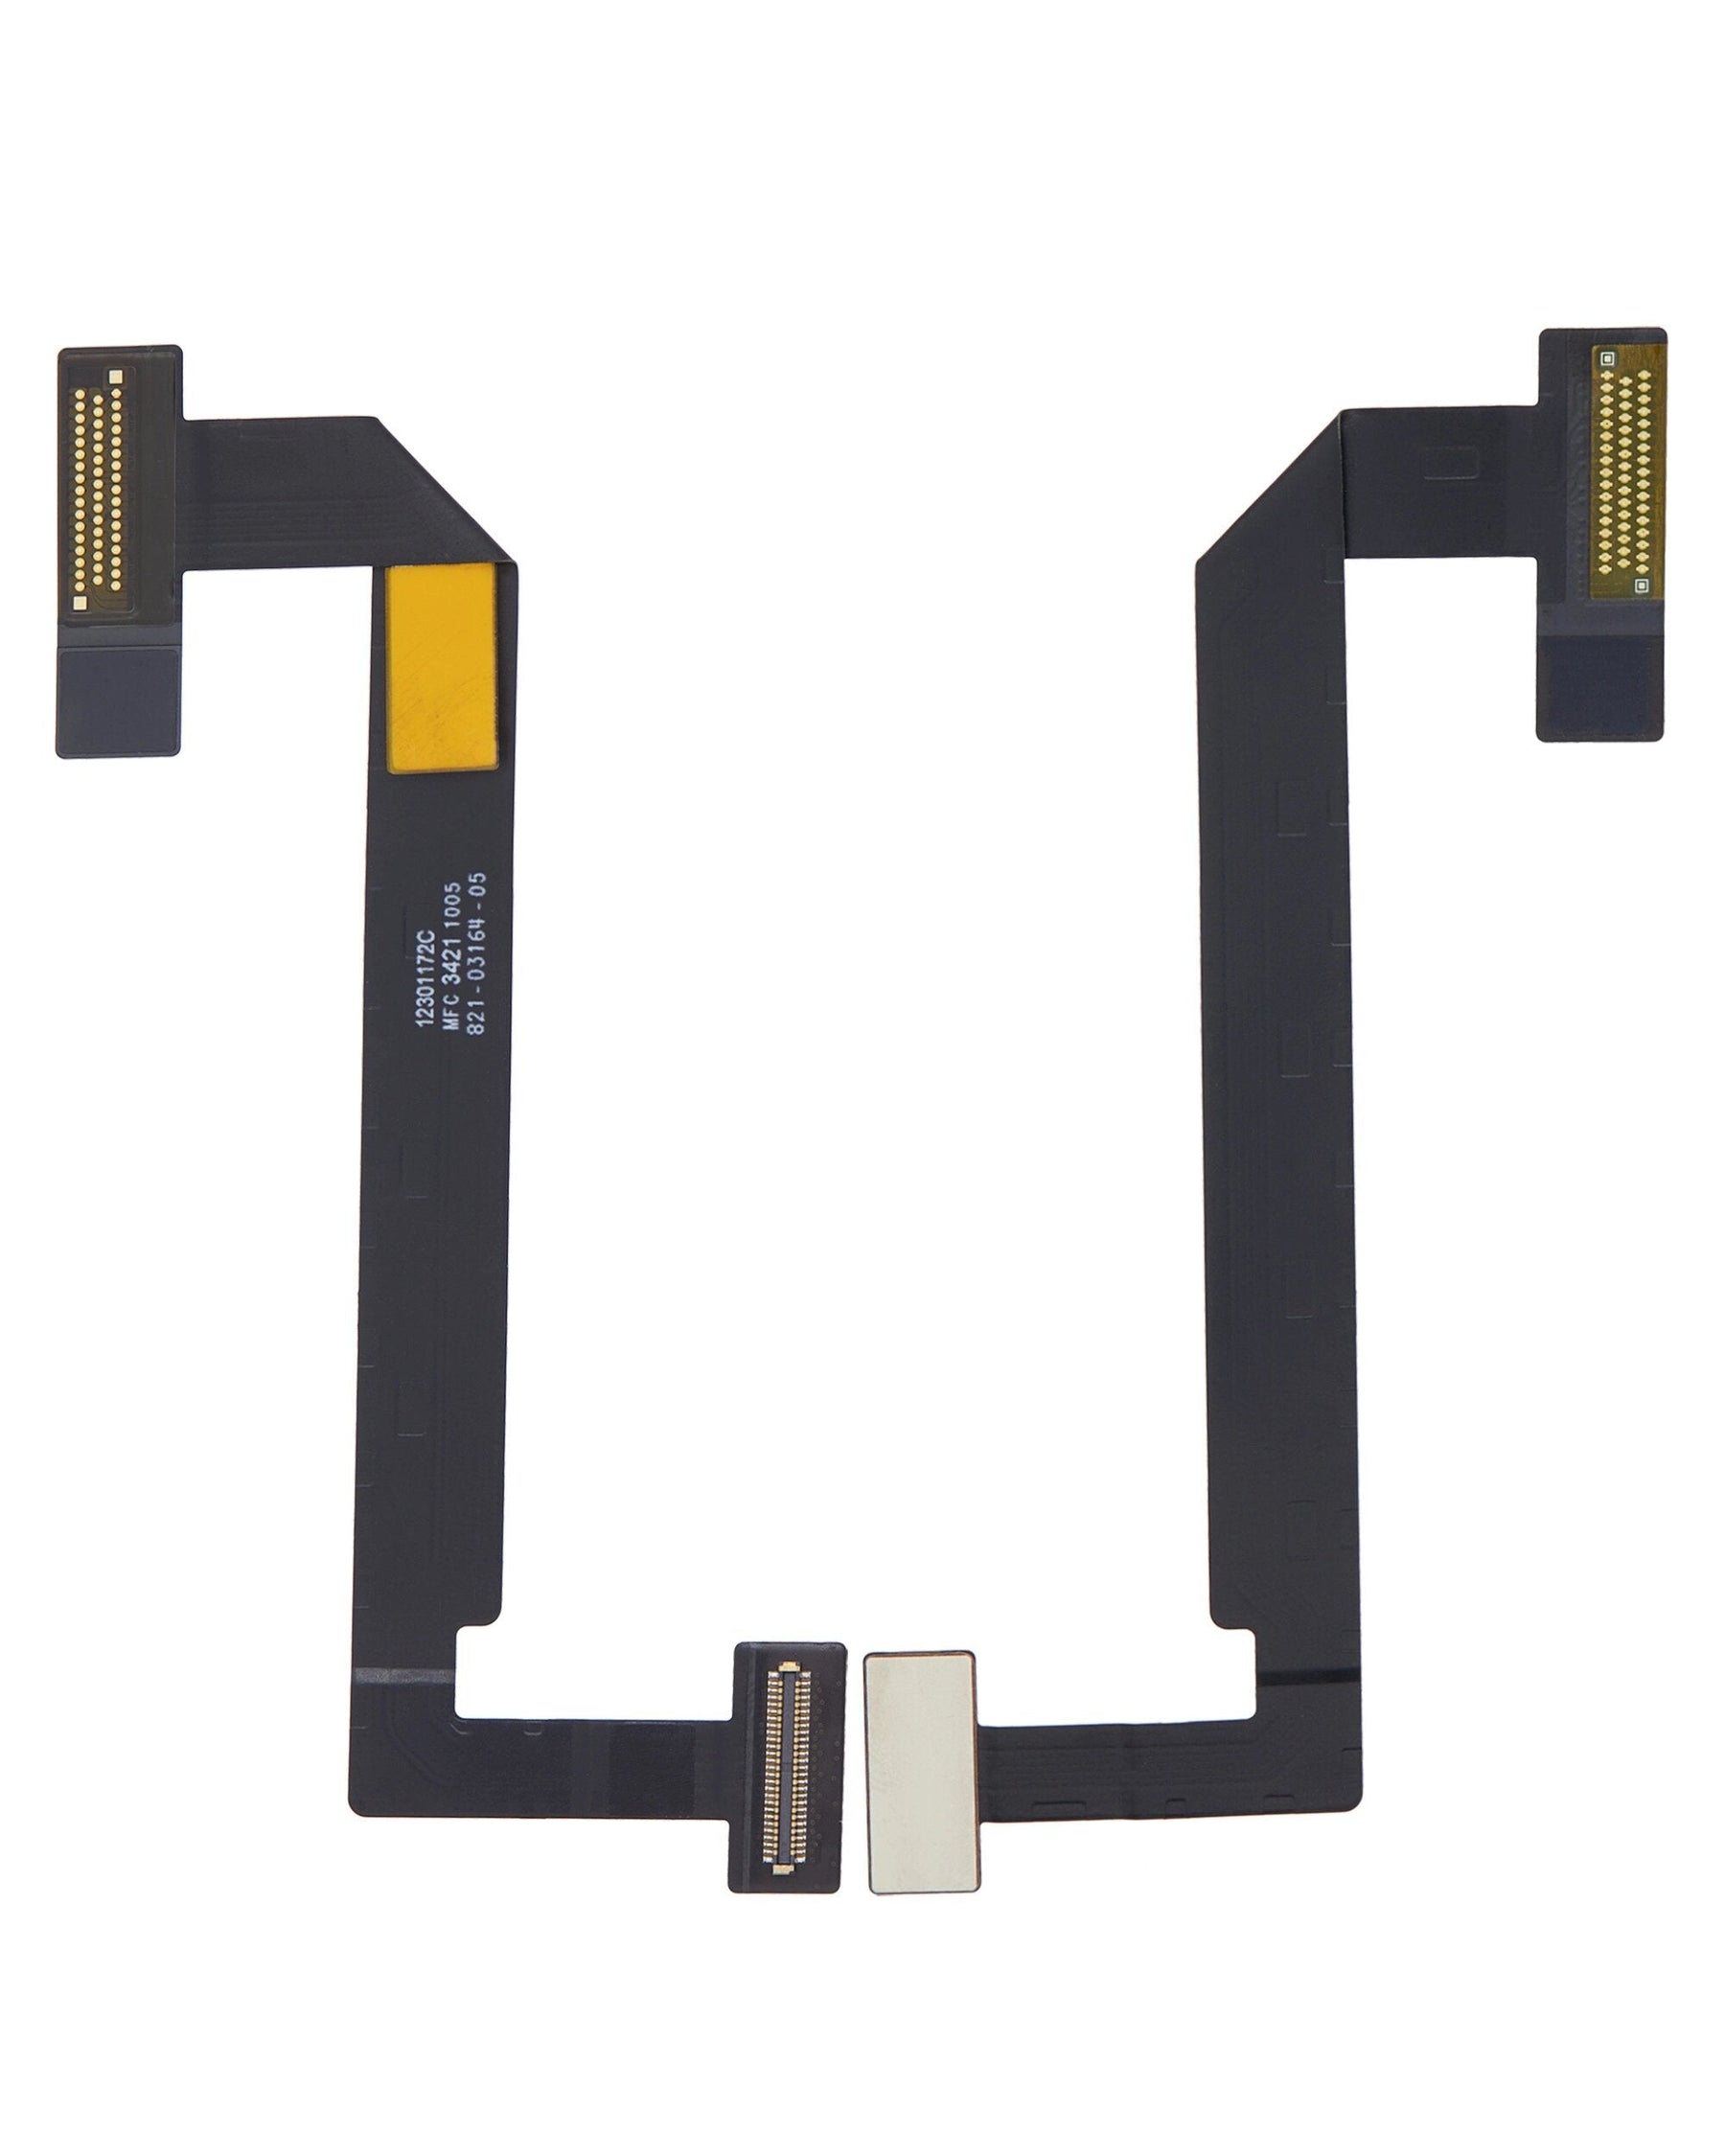 LCD FLEX CABLE COMPATIBLE WITH IPAD MINI 6